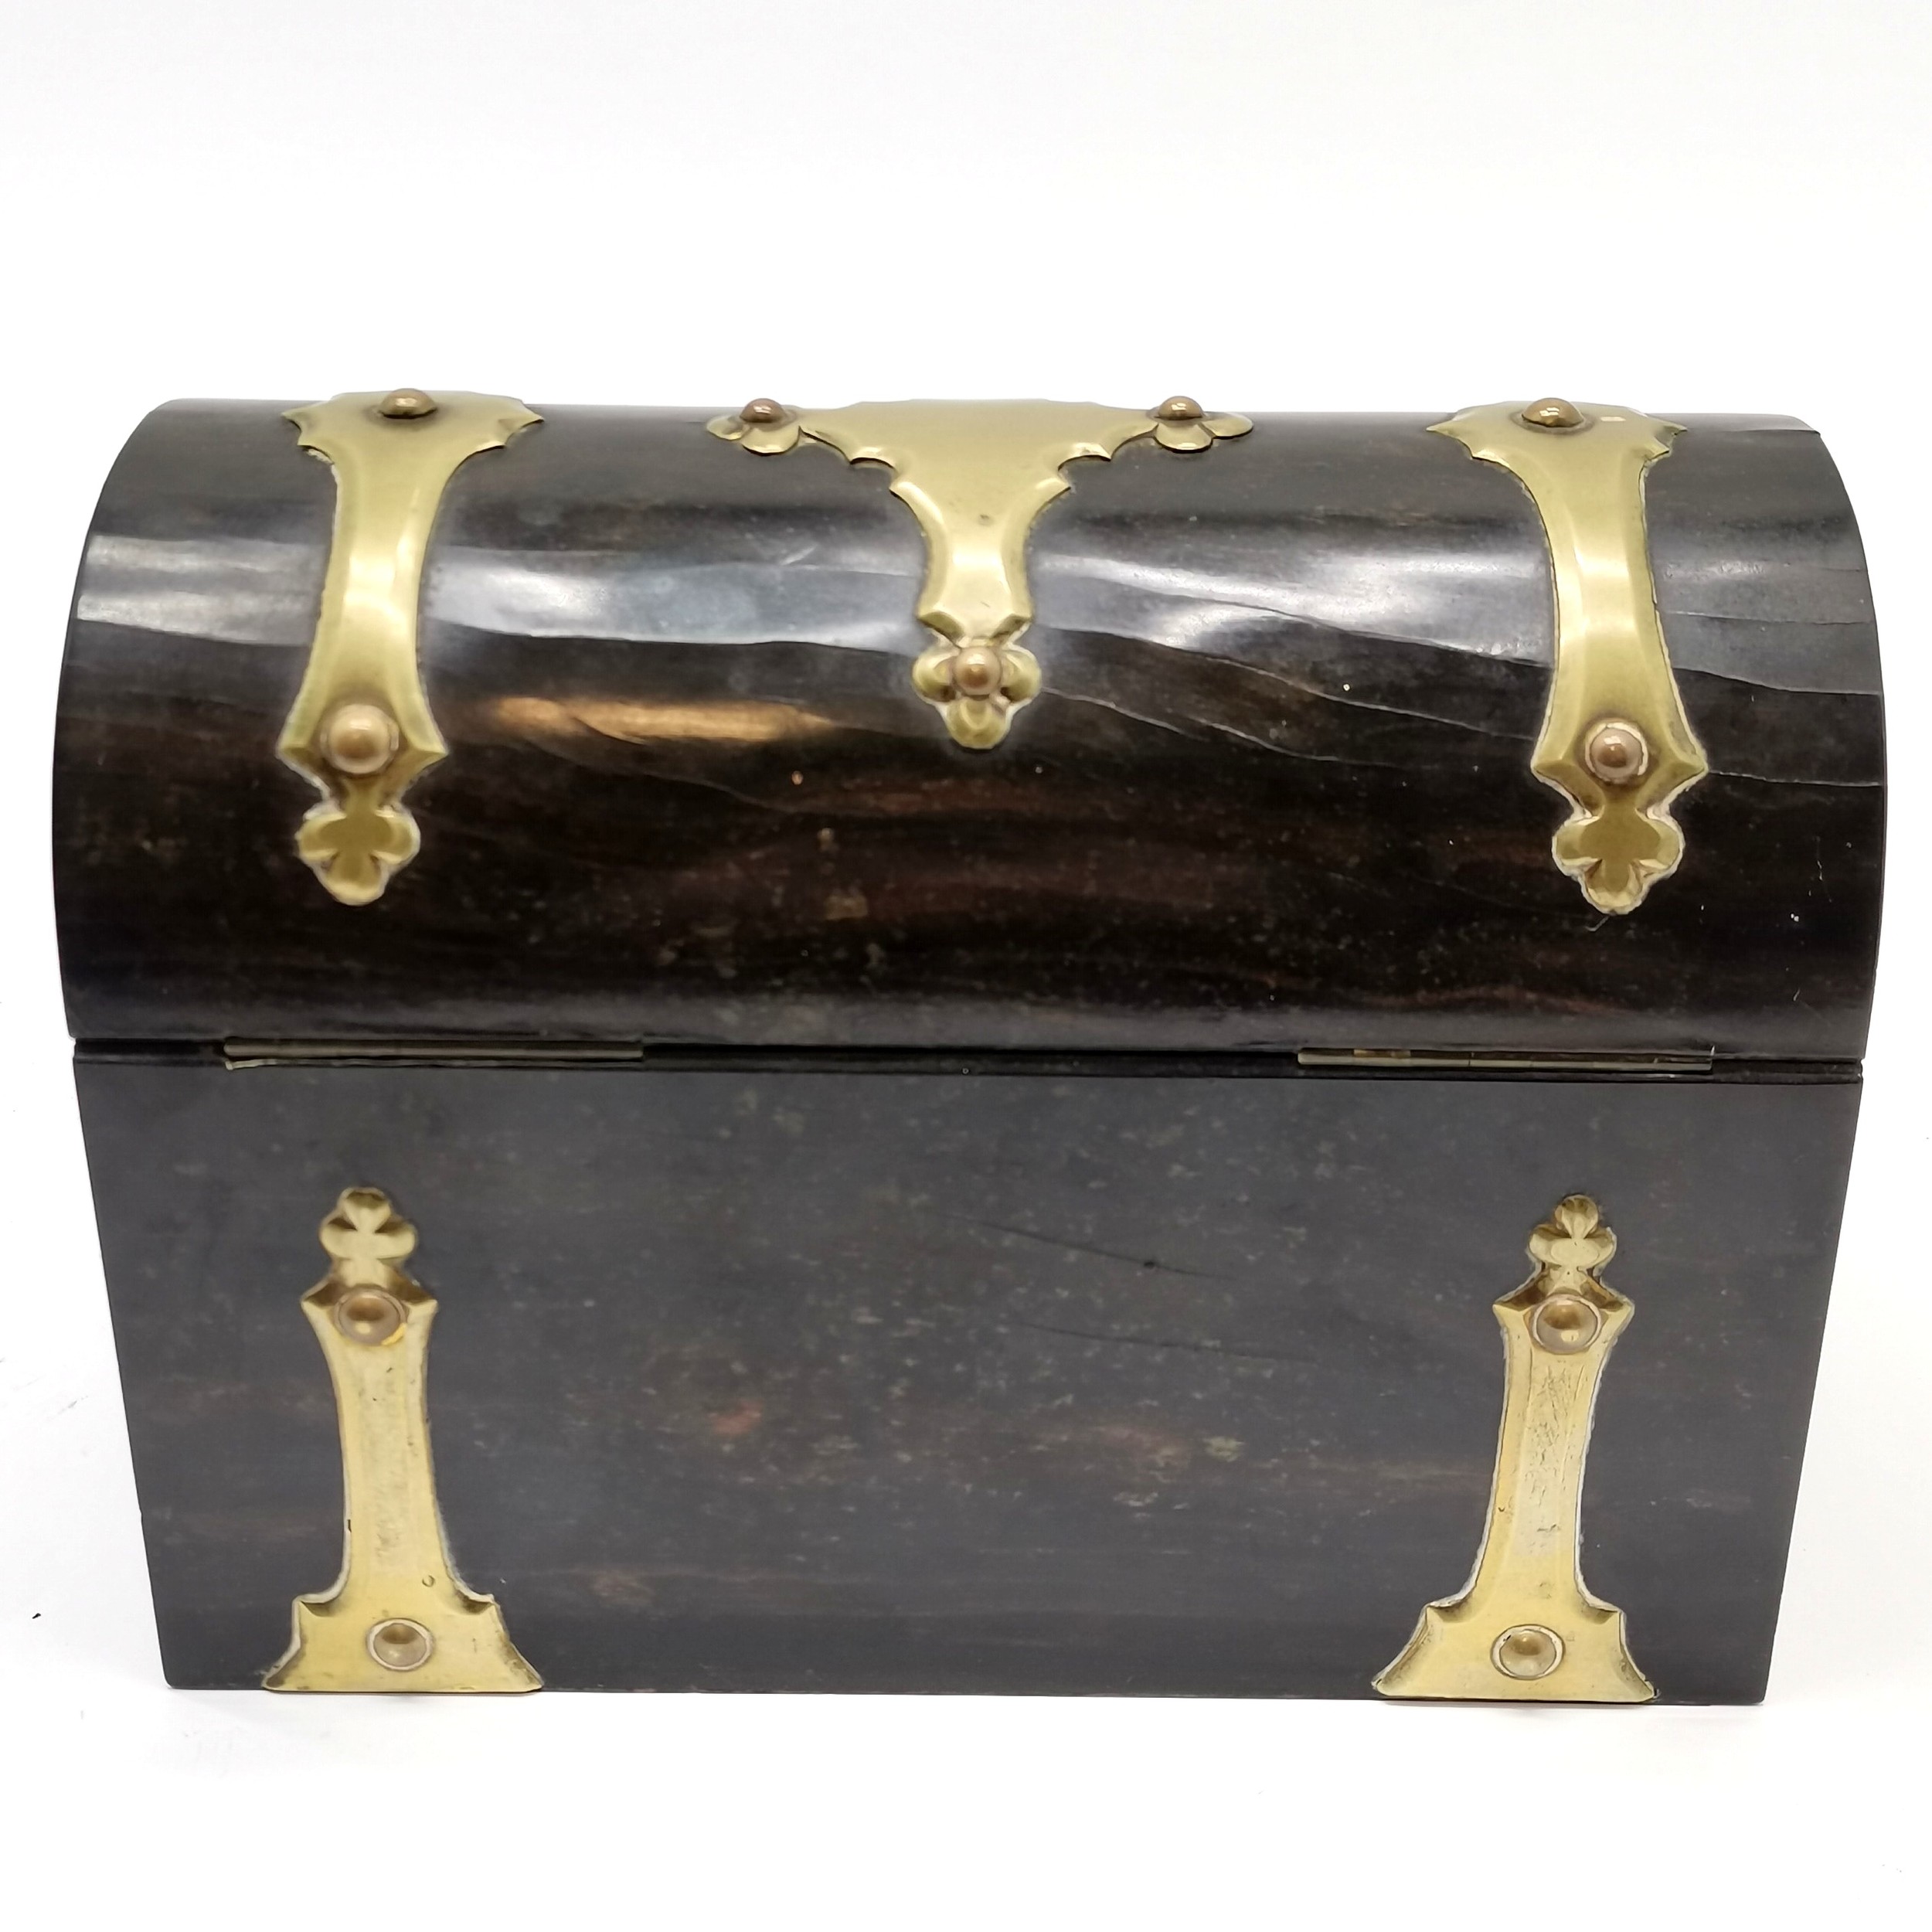 Antique coromandel wooden domed lidded stationery box with brass mounts - 22cm across x 16cm high - Image 4 of 5